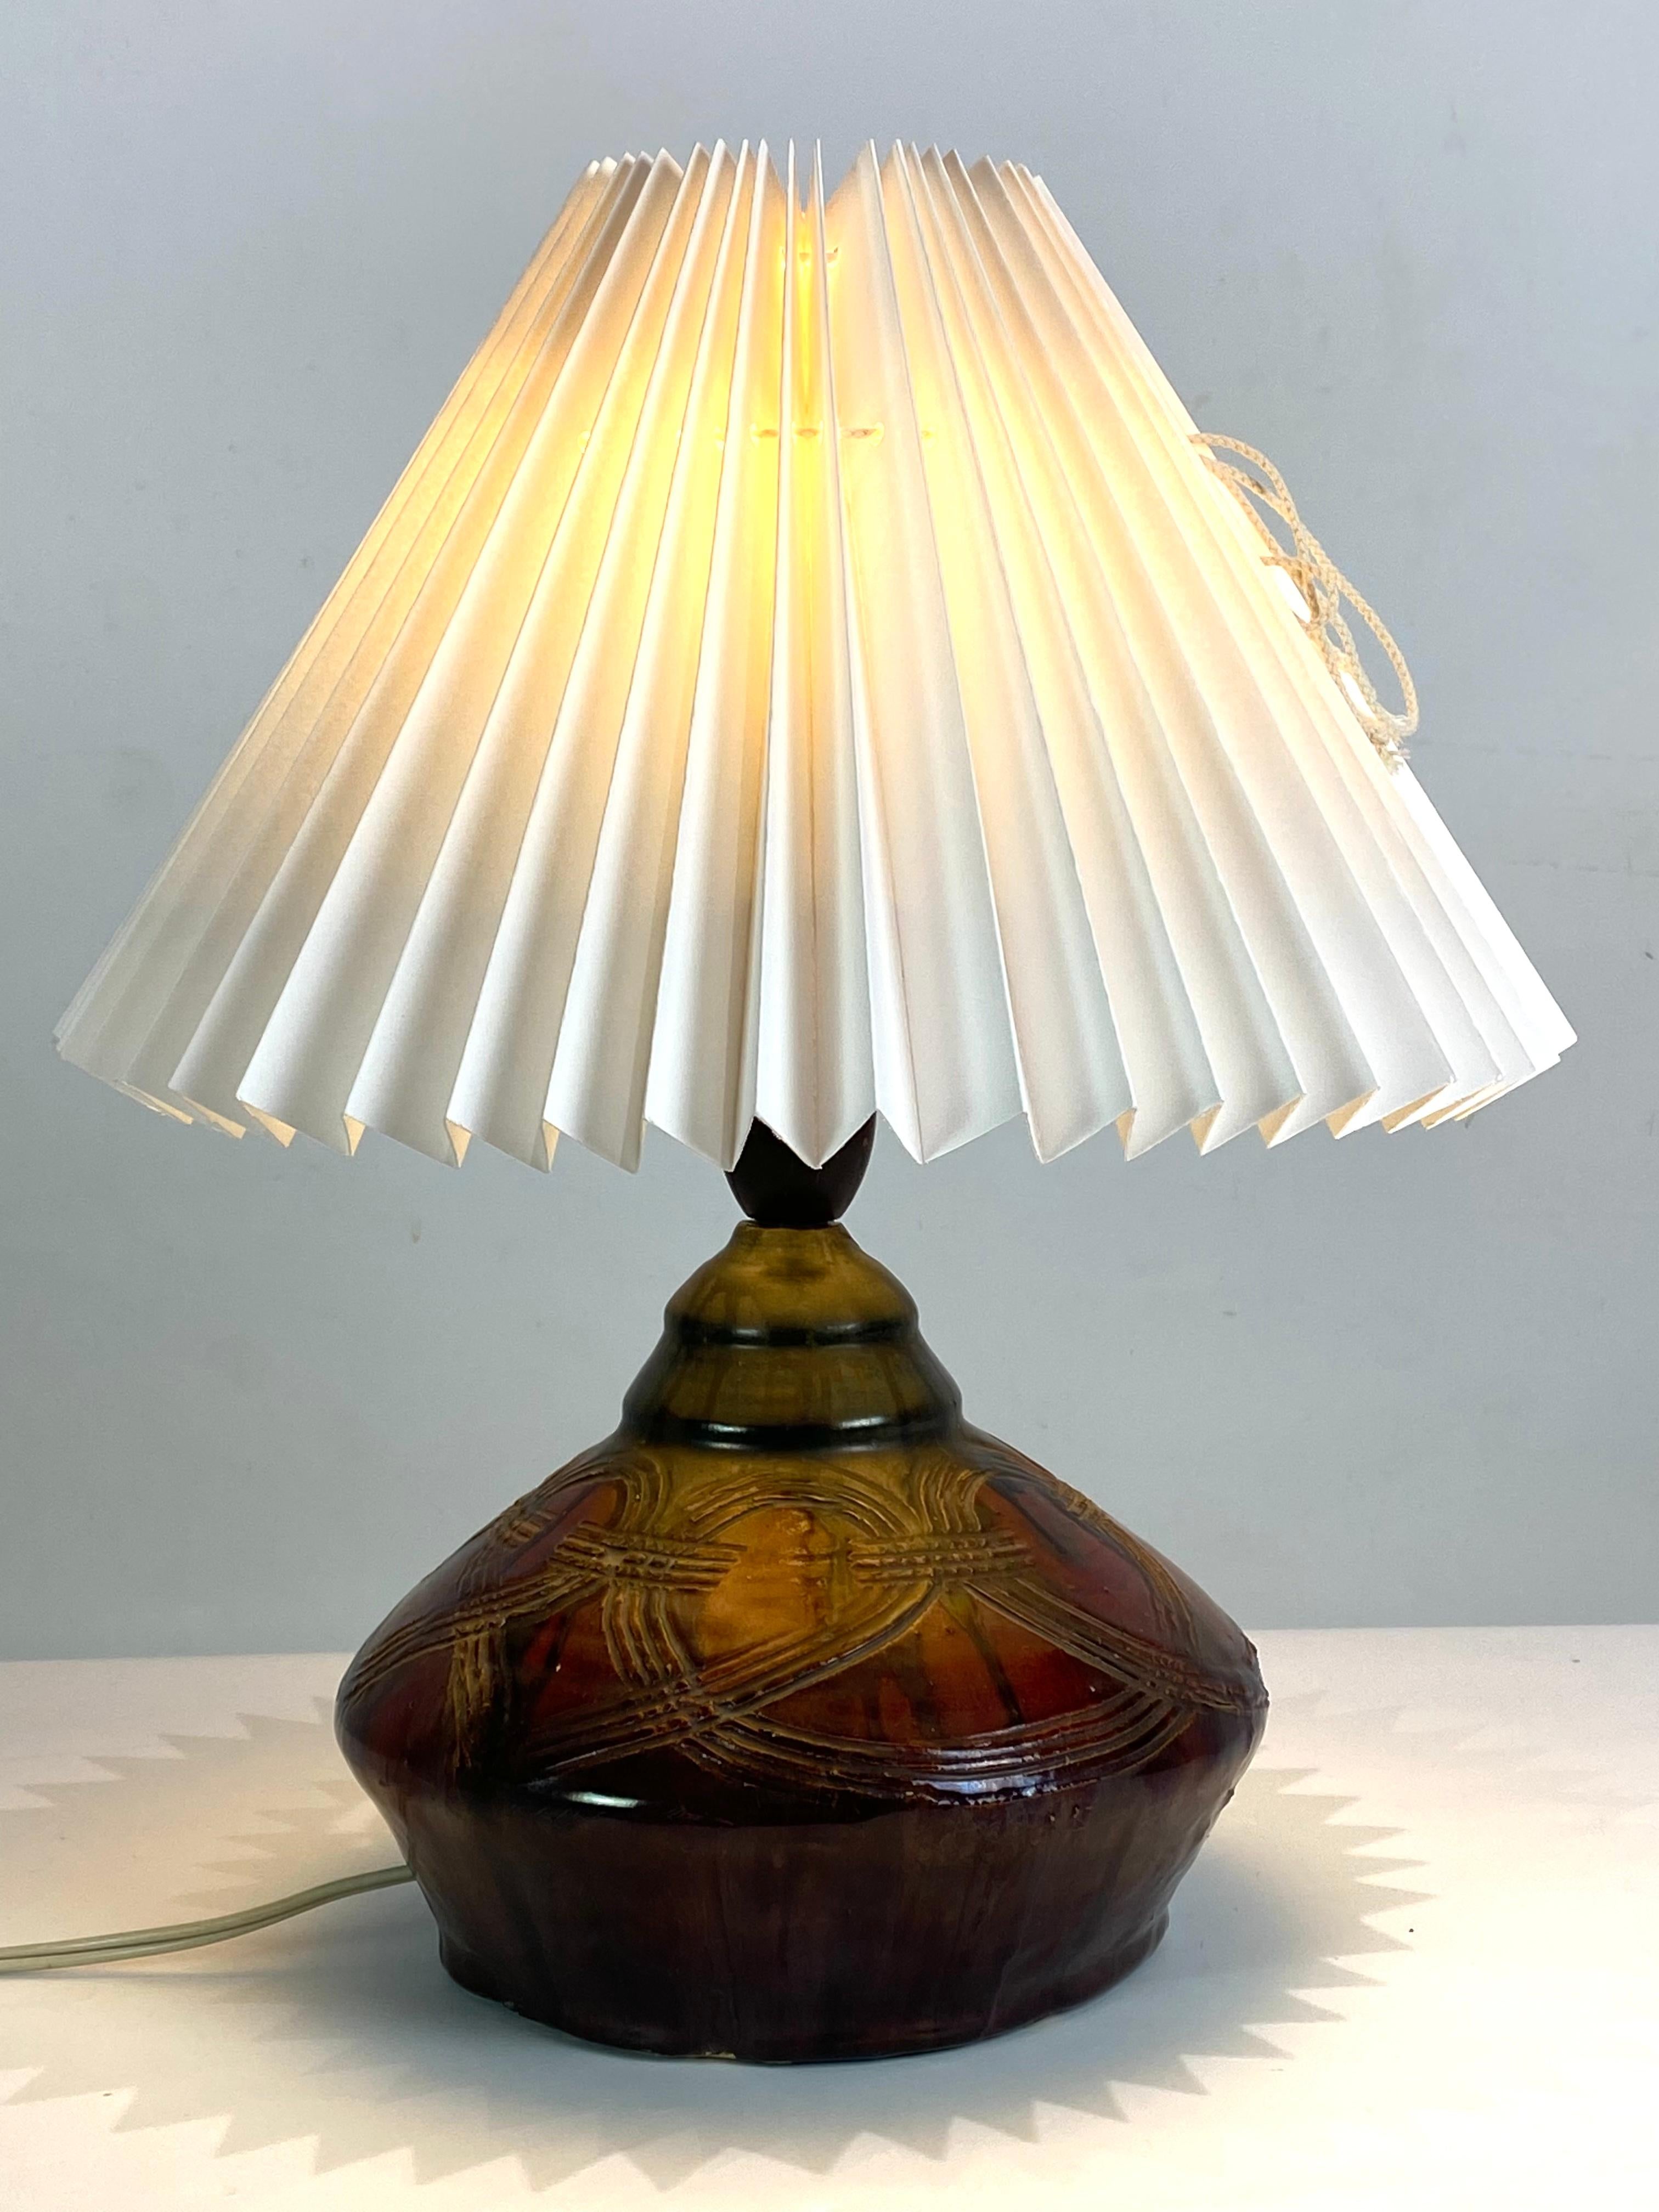 Ceramic table lamp in brown colors with paper shade, by Herman A. Kähler from the 1940s. The lamp is in great vintage condition.